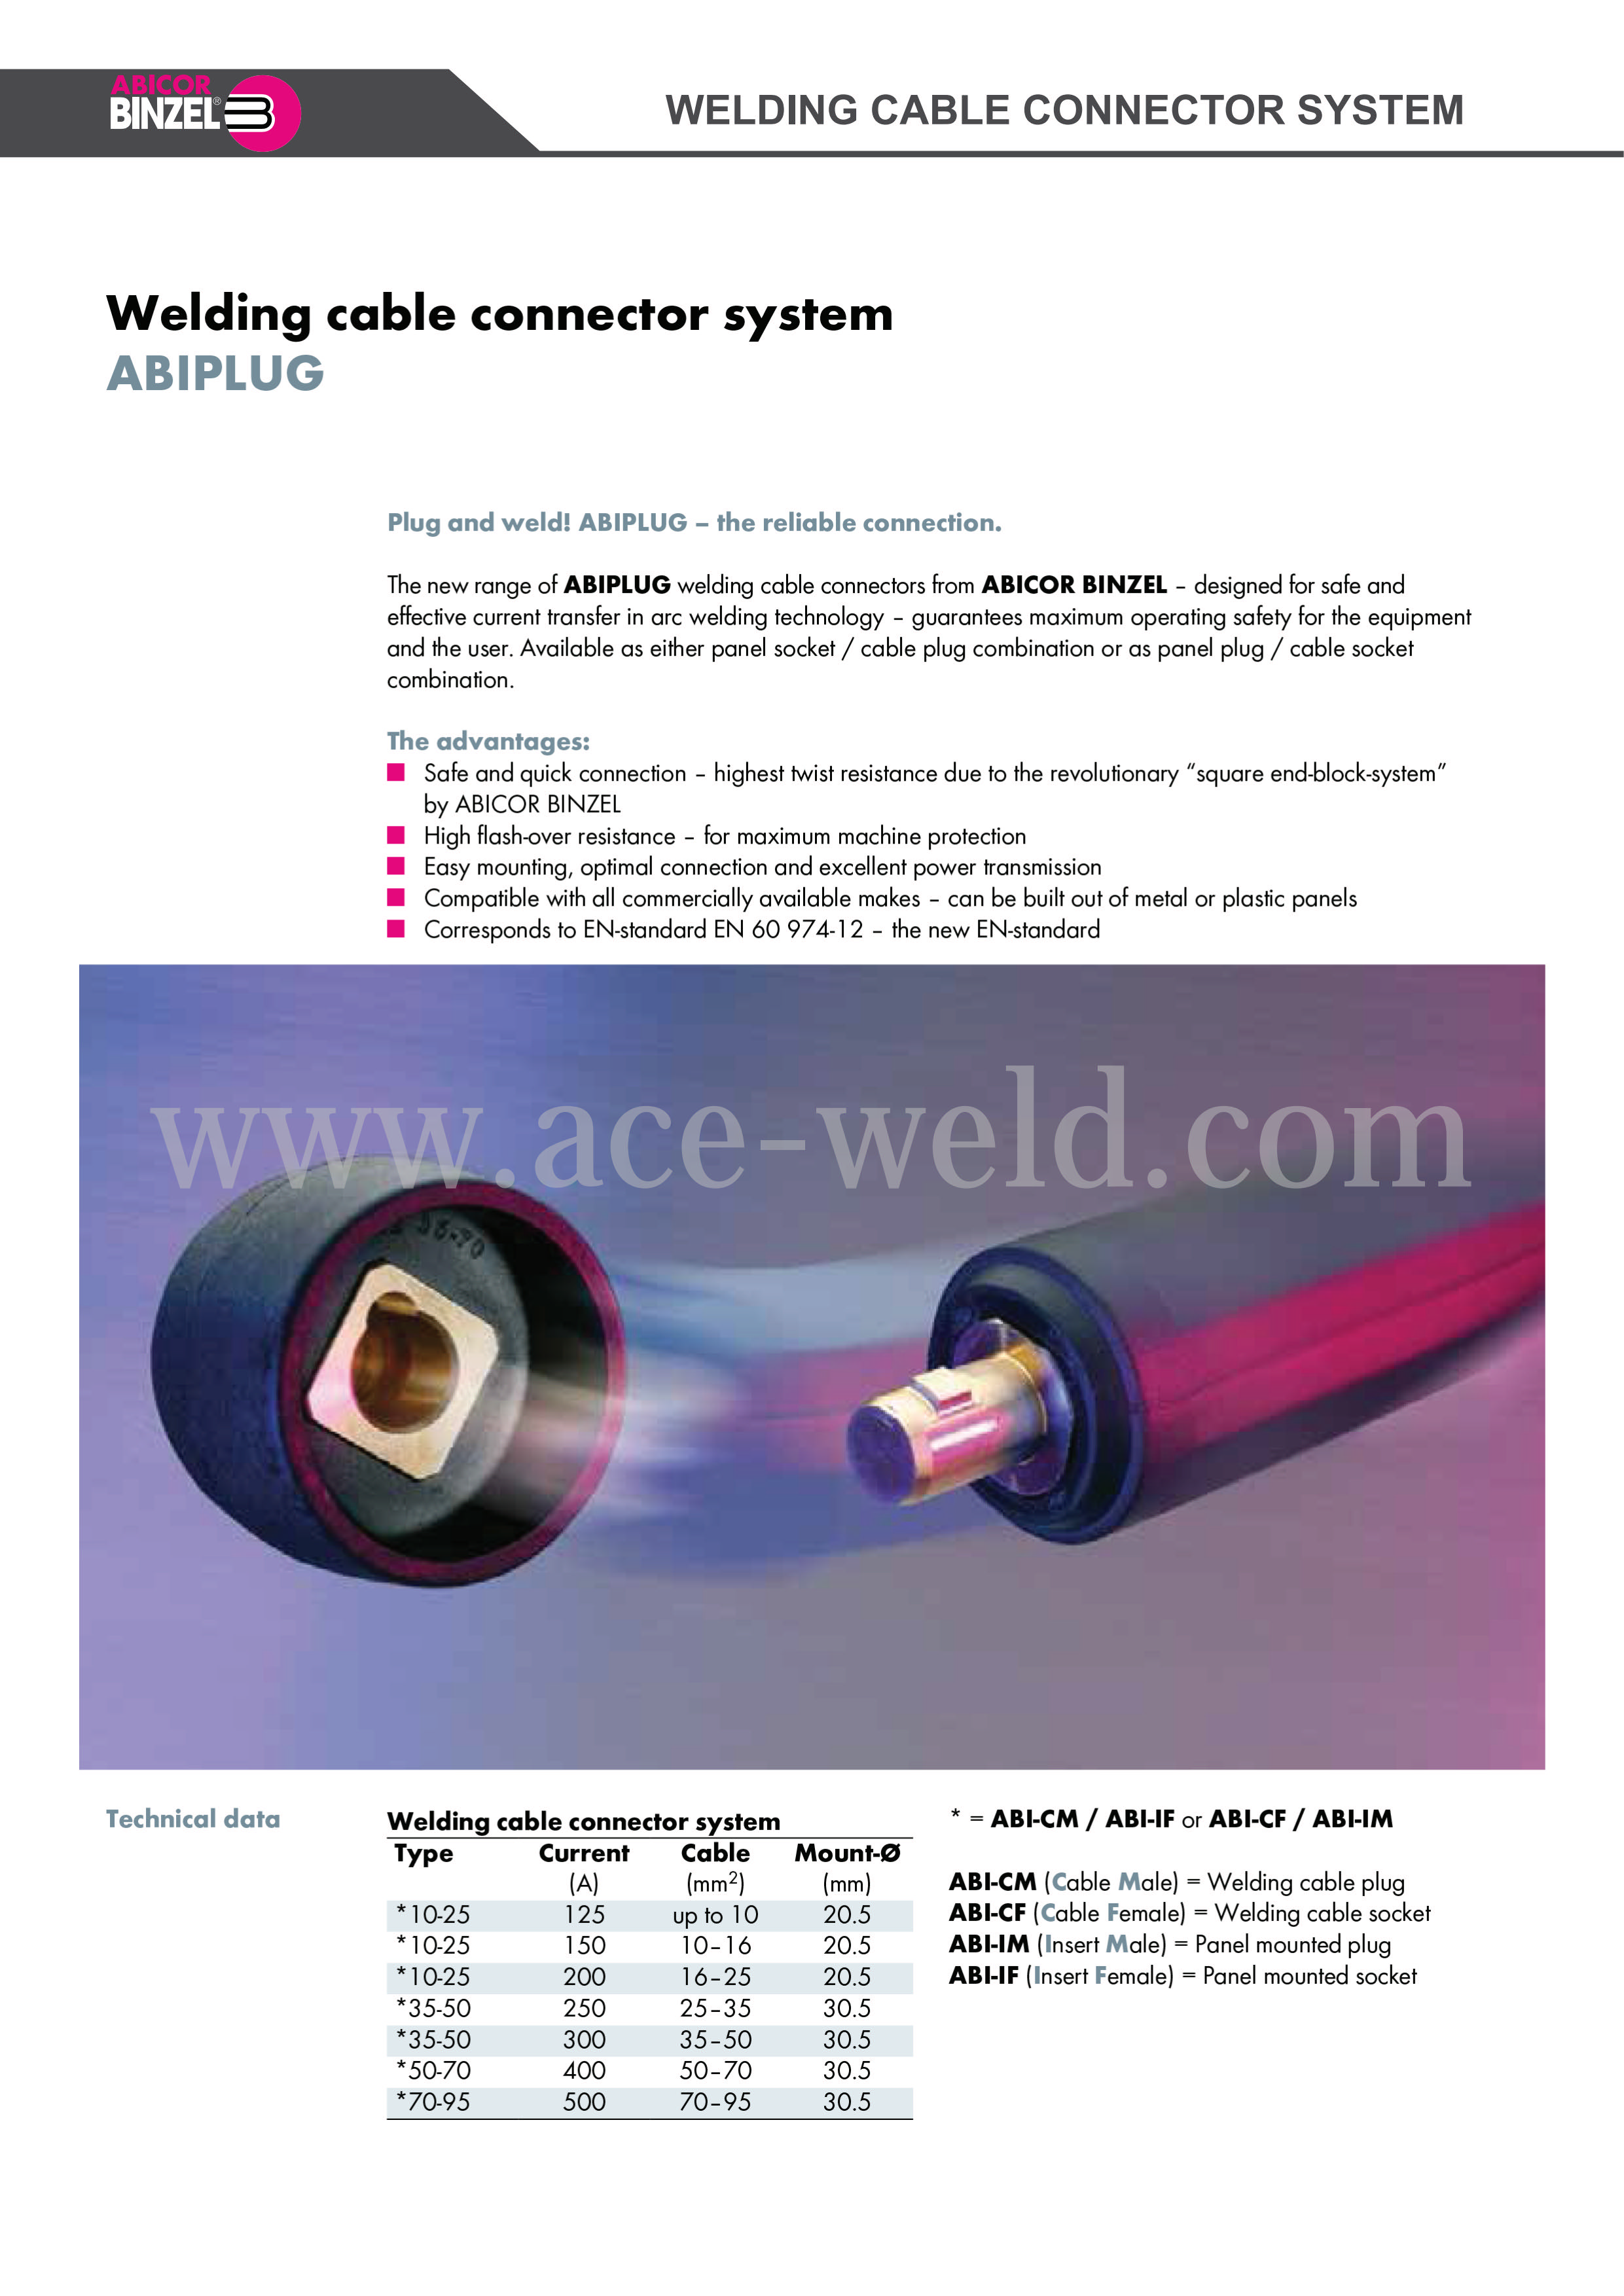 Abicor Binzel Welding Cable Connector System Accessories Welding Equipments  Selangor, Malaysia, Kuala Lumpur (KL), Puchong Supplier, Suppliers, Supply,  Supplies | ACE Weld Sdn Bhd